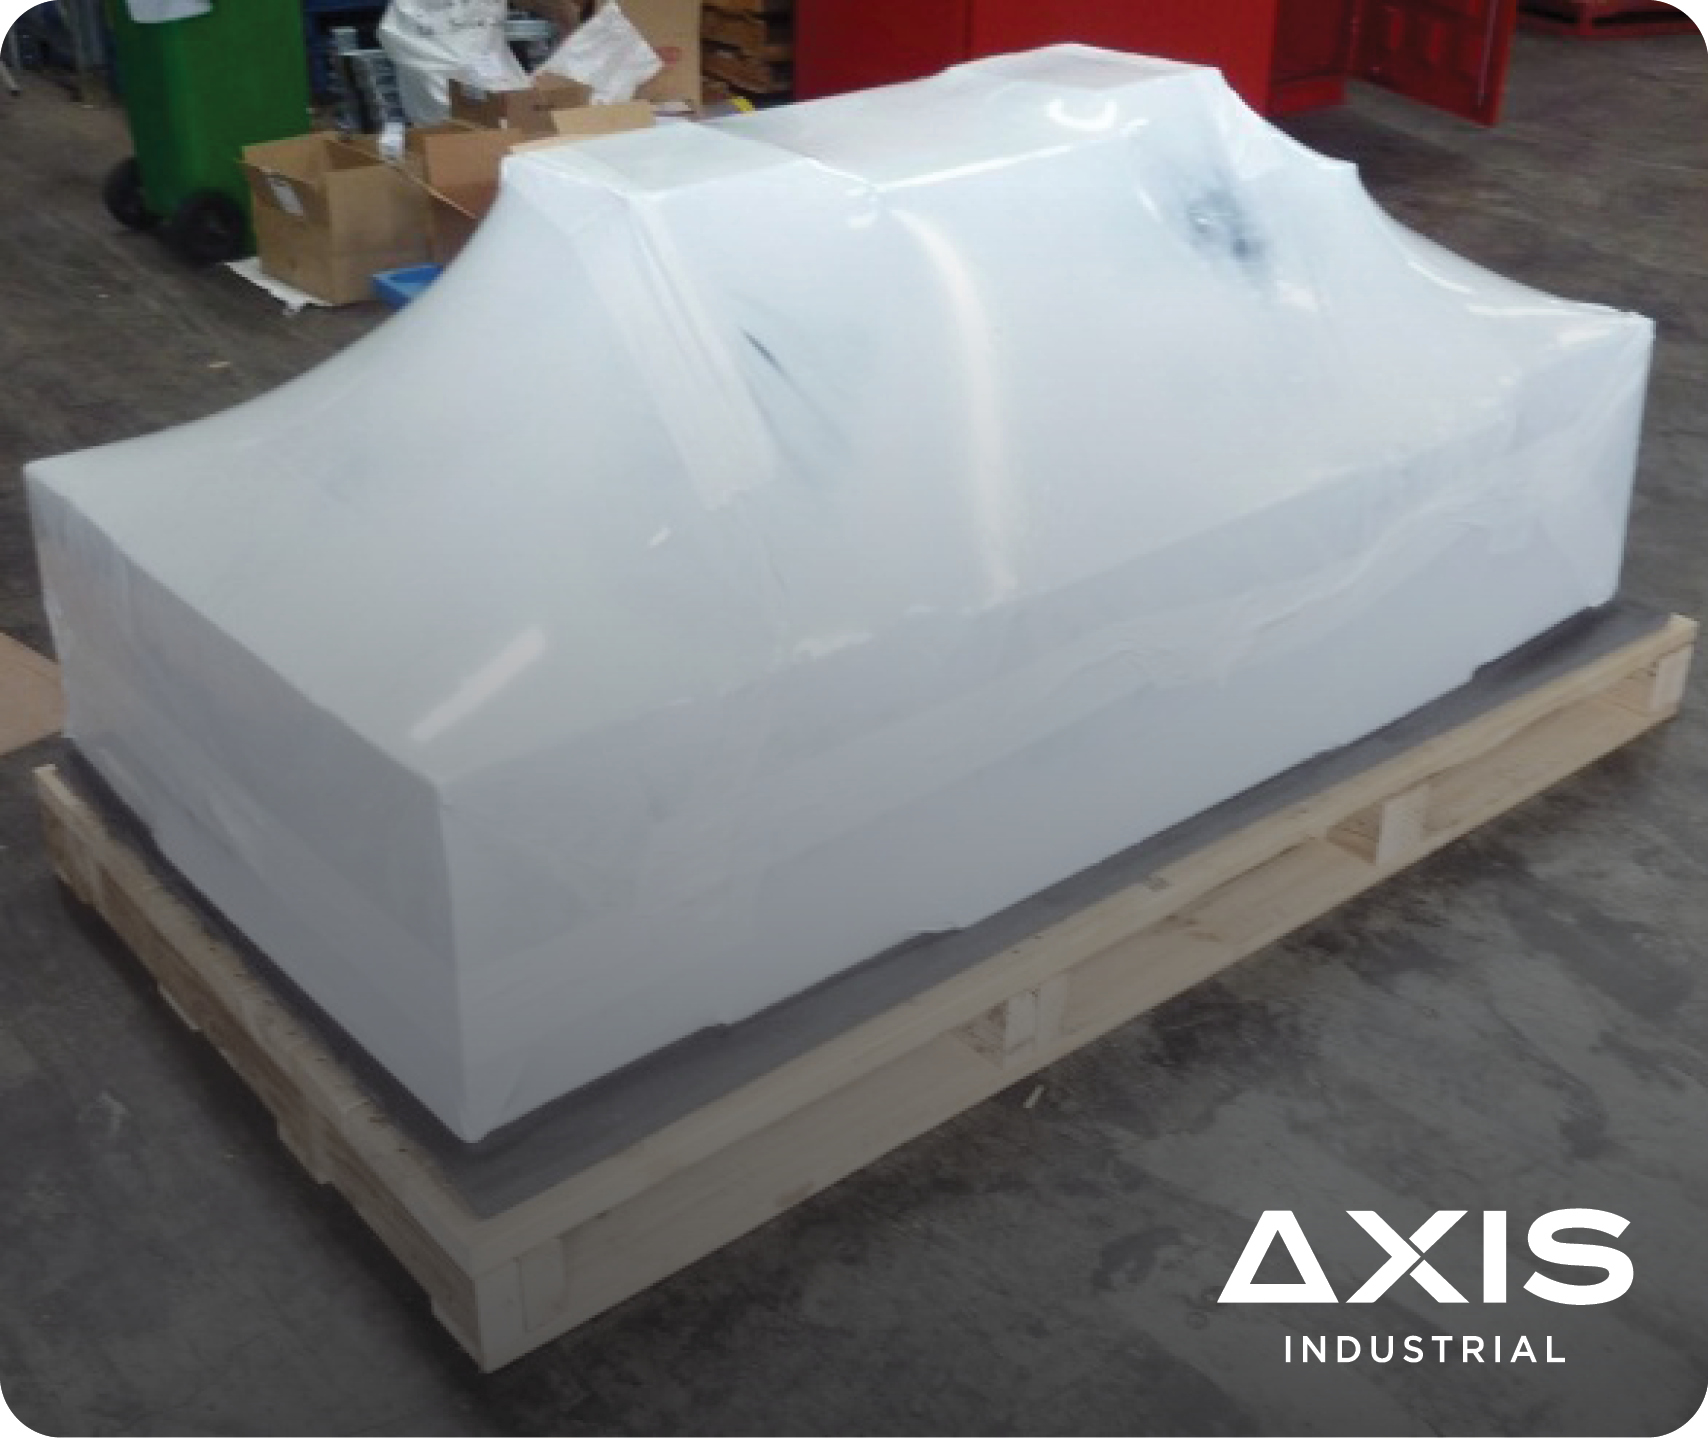 AXIS Industrial Heat Shrink Wrapping